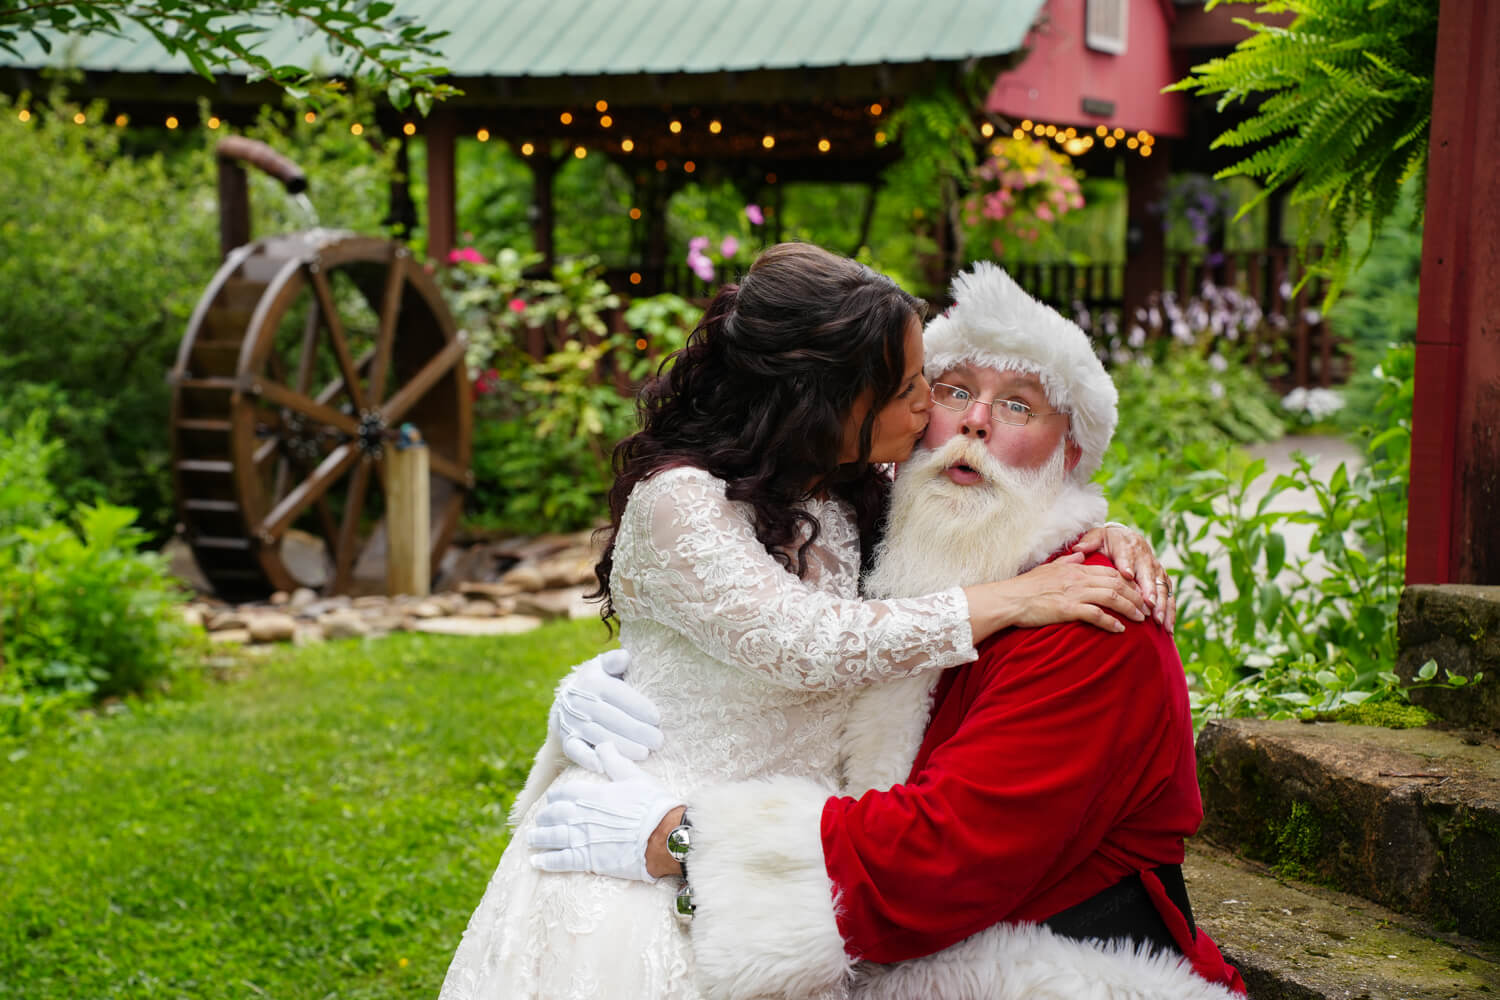 Santa and Mrs. Clause on their wedding day by a water wheel at Honeysuckle Hills in Pigeon Forge